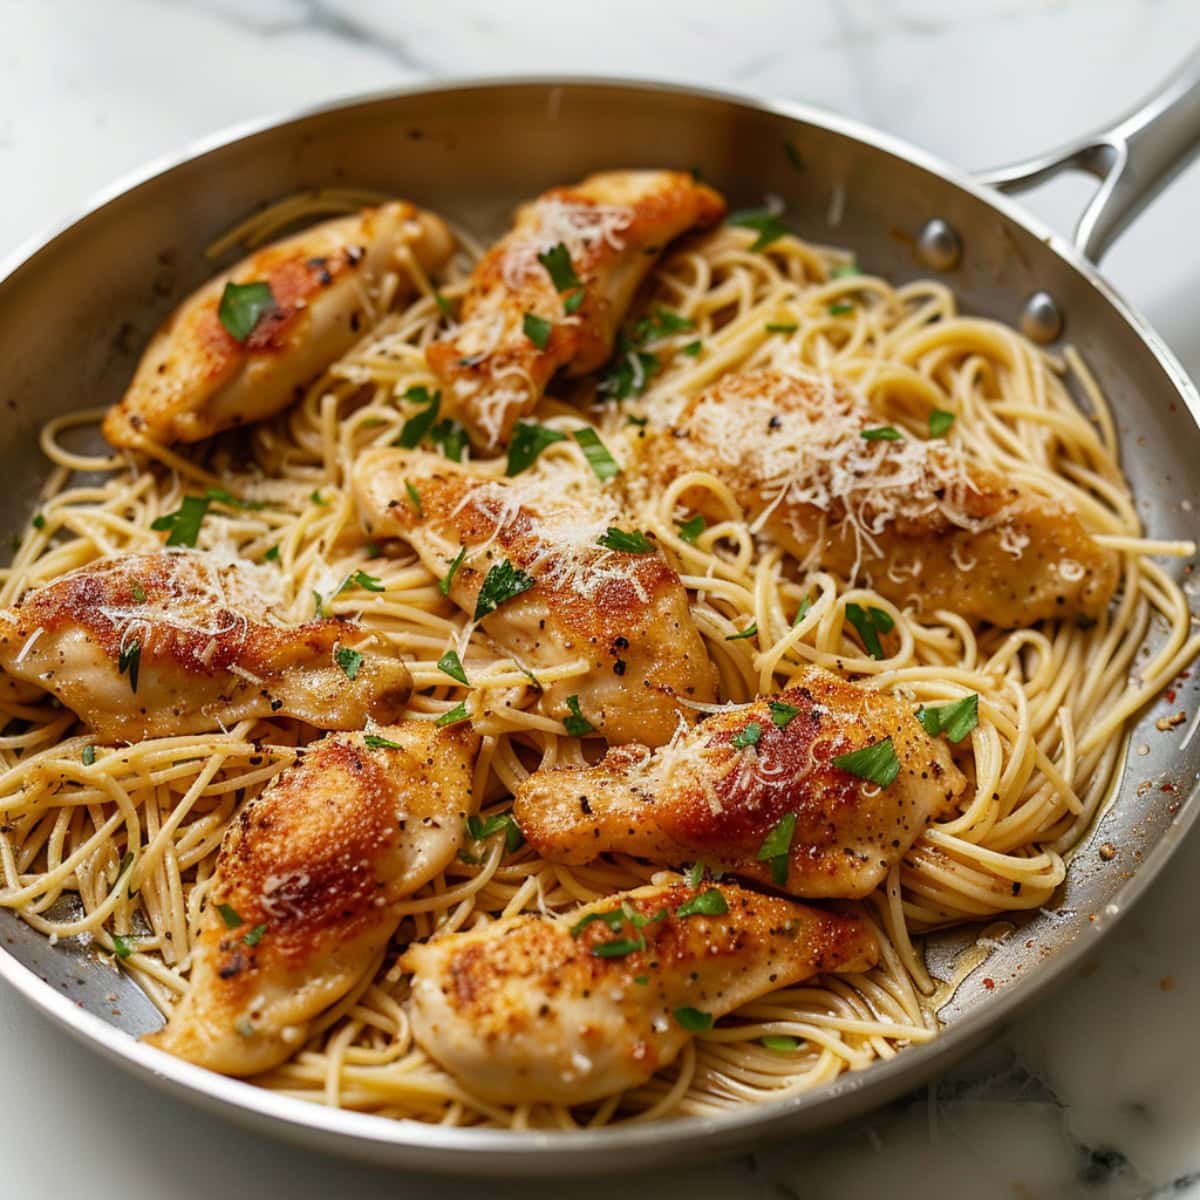 Chicken scampi tossed in a large skillet.